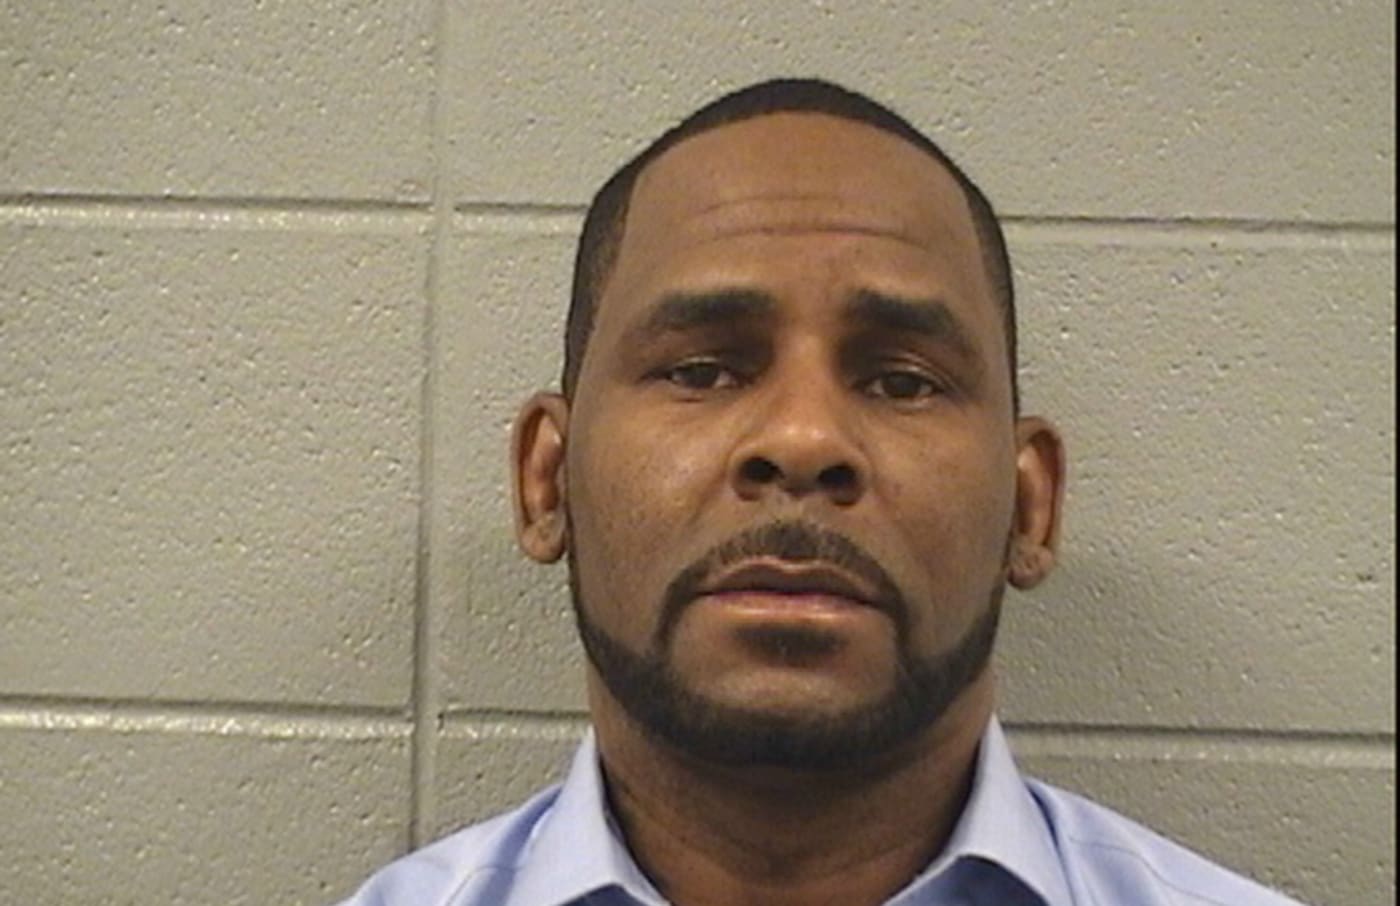 R. Kelly poses for a mugshot photo